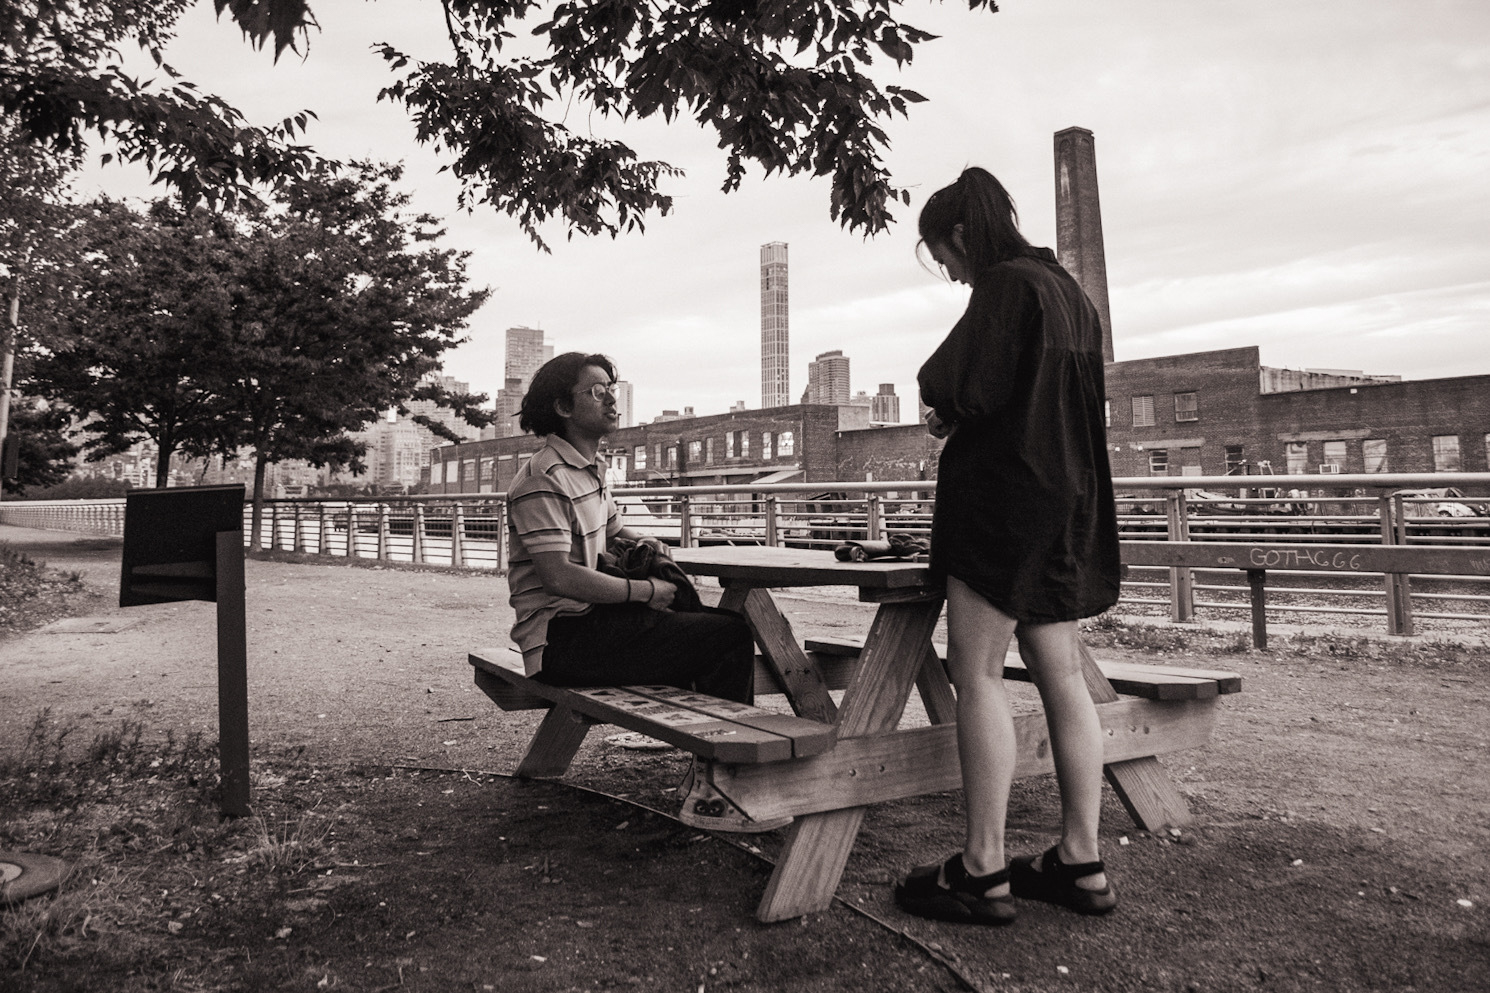 Black-and-white photo of a man sitting at a picnic table with a woman standing next to him. The city skyline is in the background.